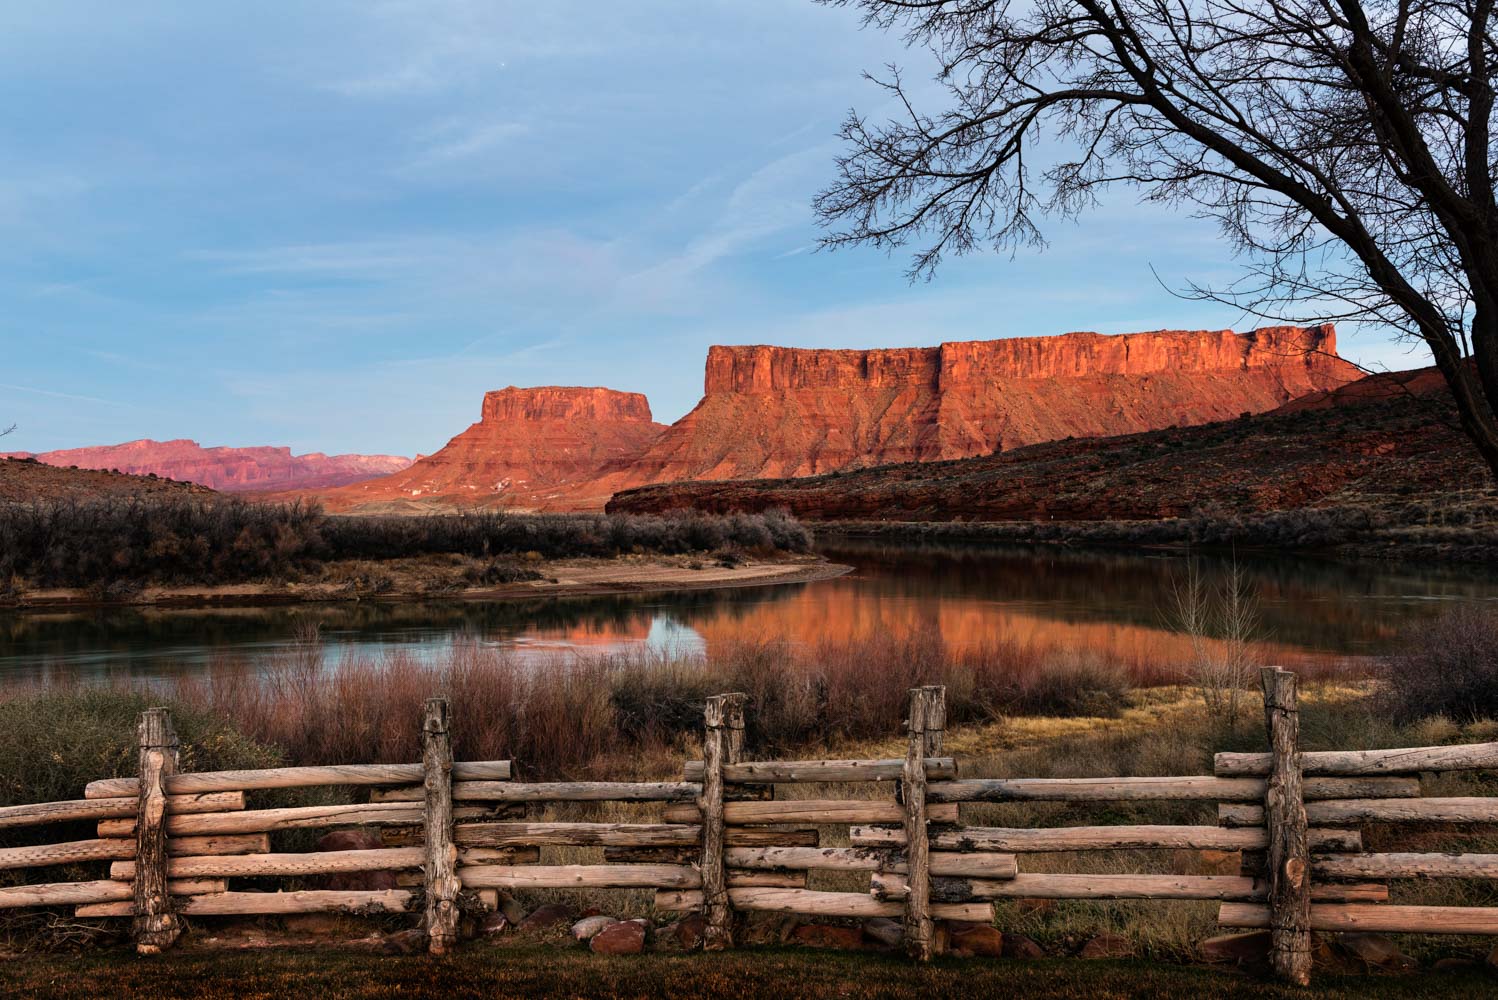 View from our riverside suite at Red Cliffs Lodge, Moab;&nbsp;Nikon D810, 24–70mm, f/8, 2.5s, ISO 200